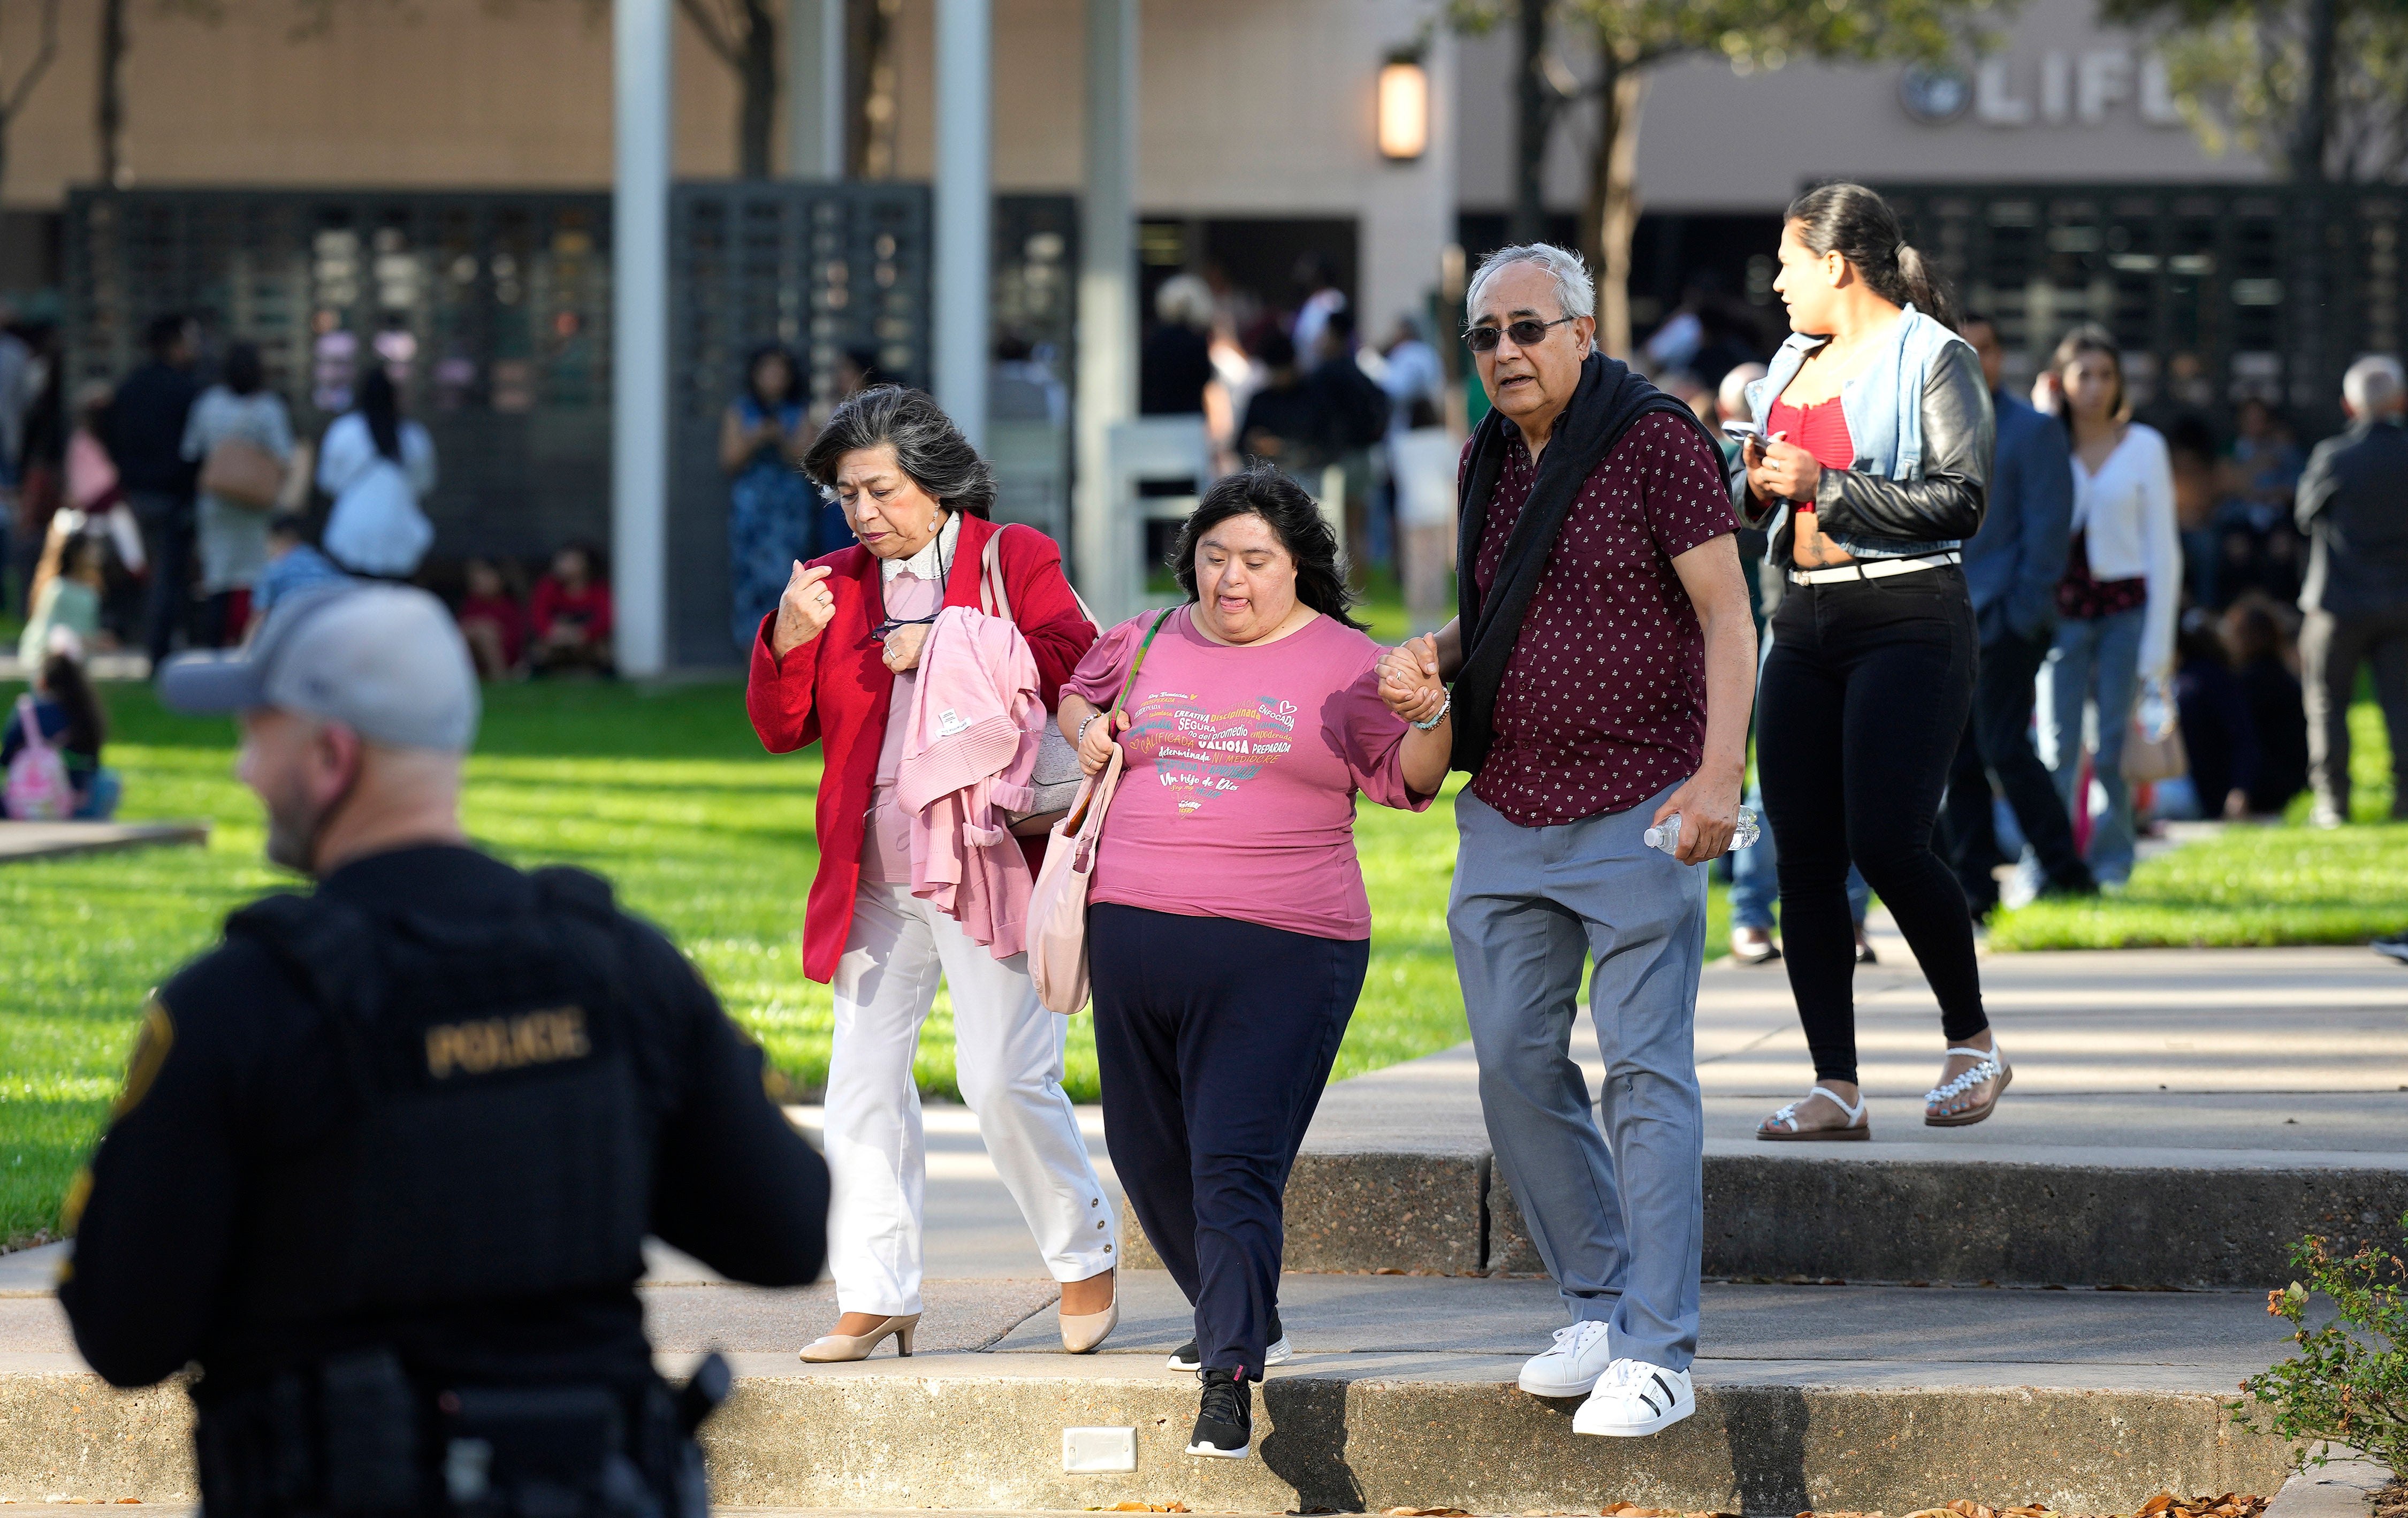 Worshippers leave the Lakewood Church on Sunday after the shooting